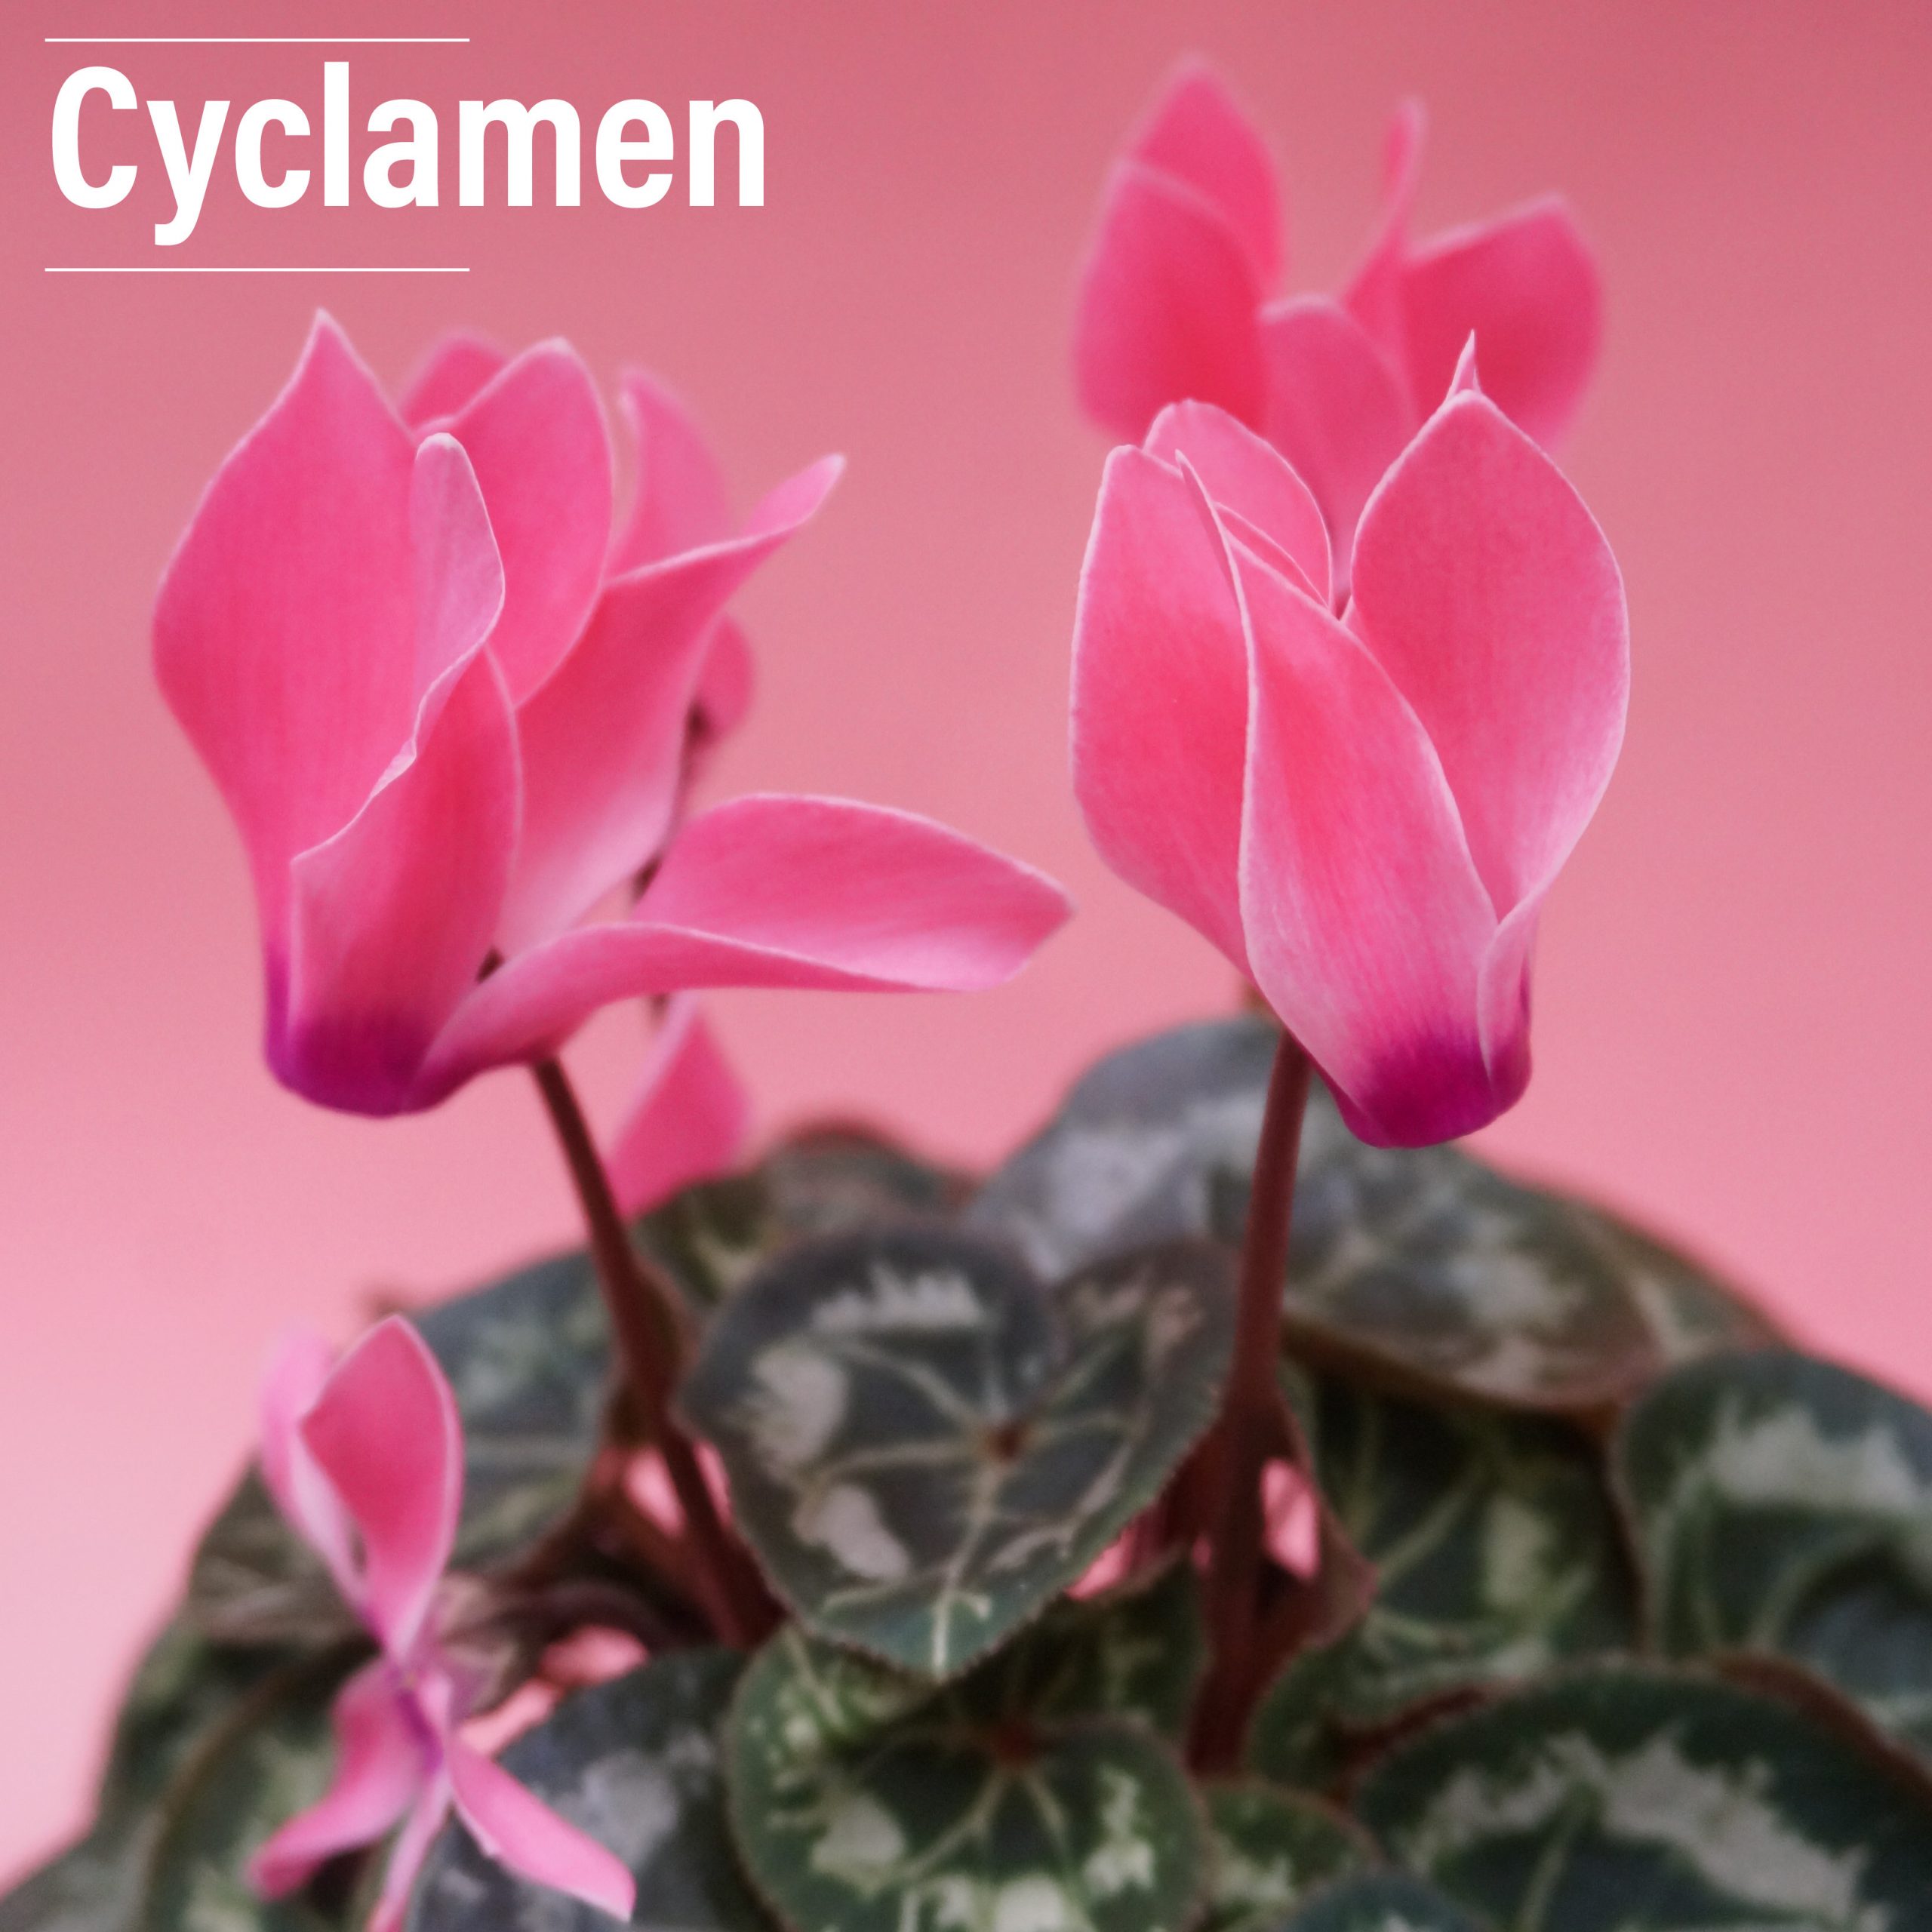 Cyclamen close up. A nice change to a regular flower rotation